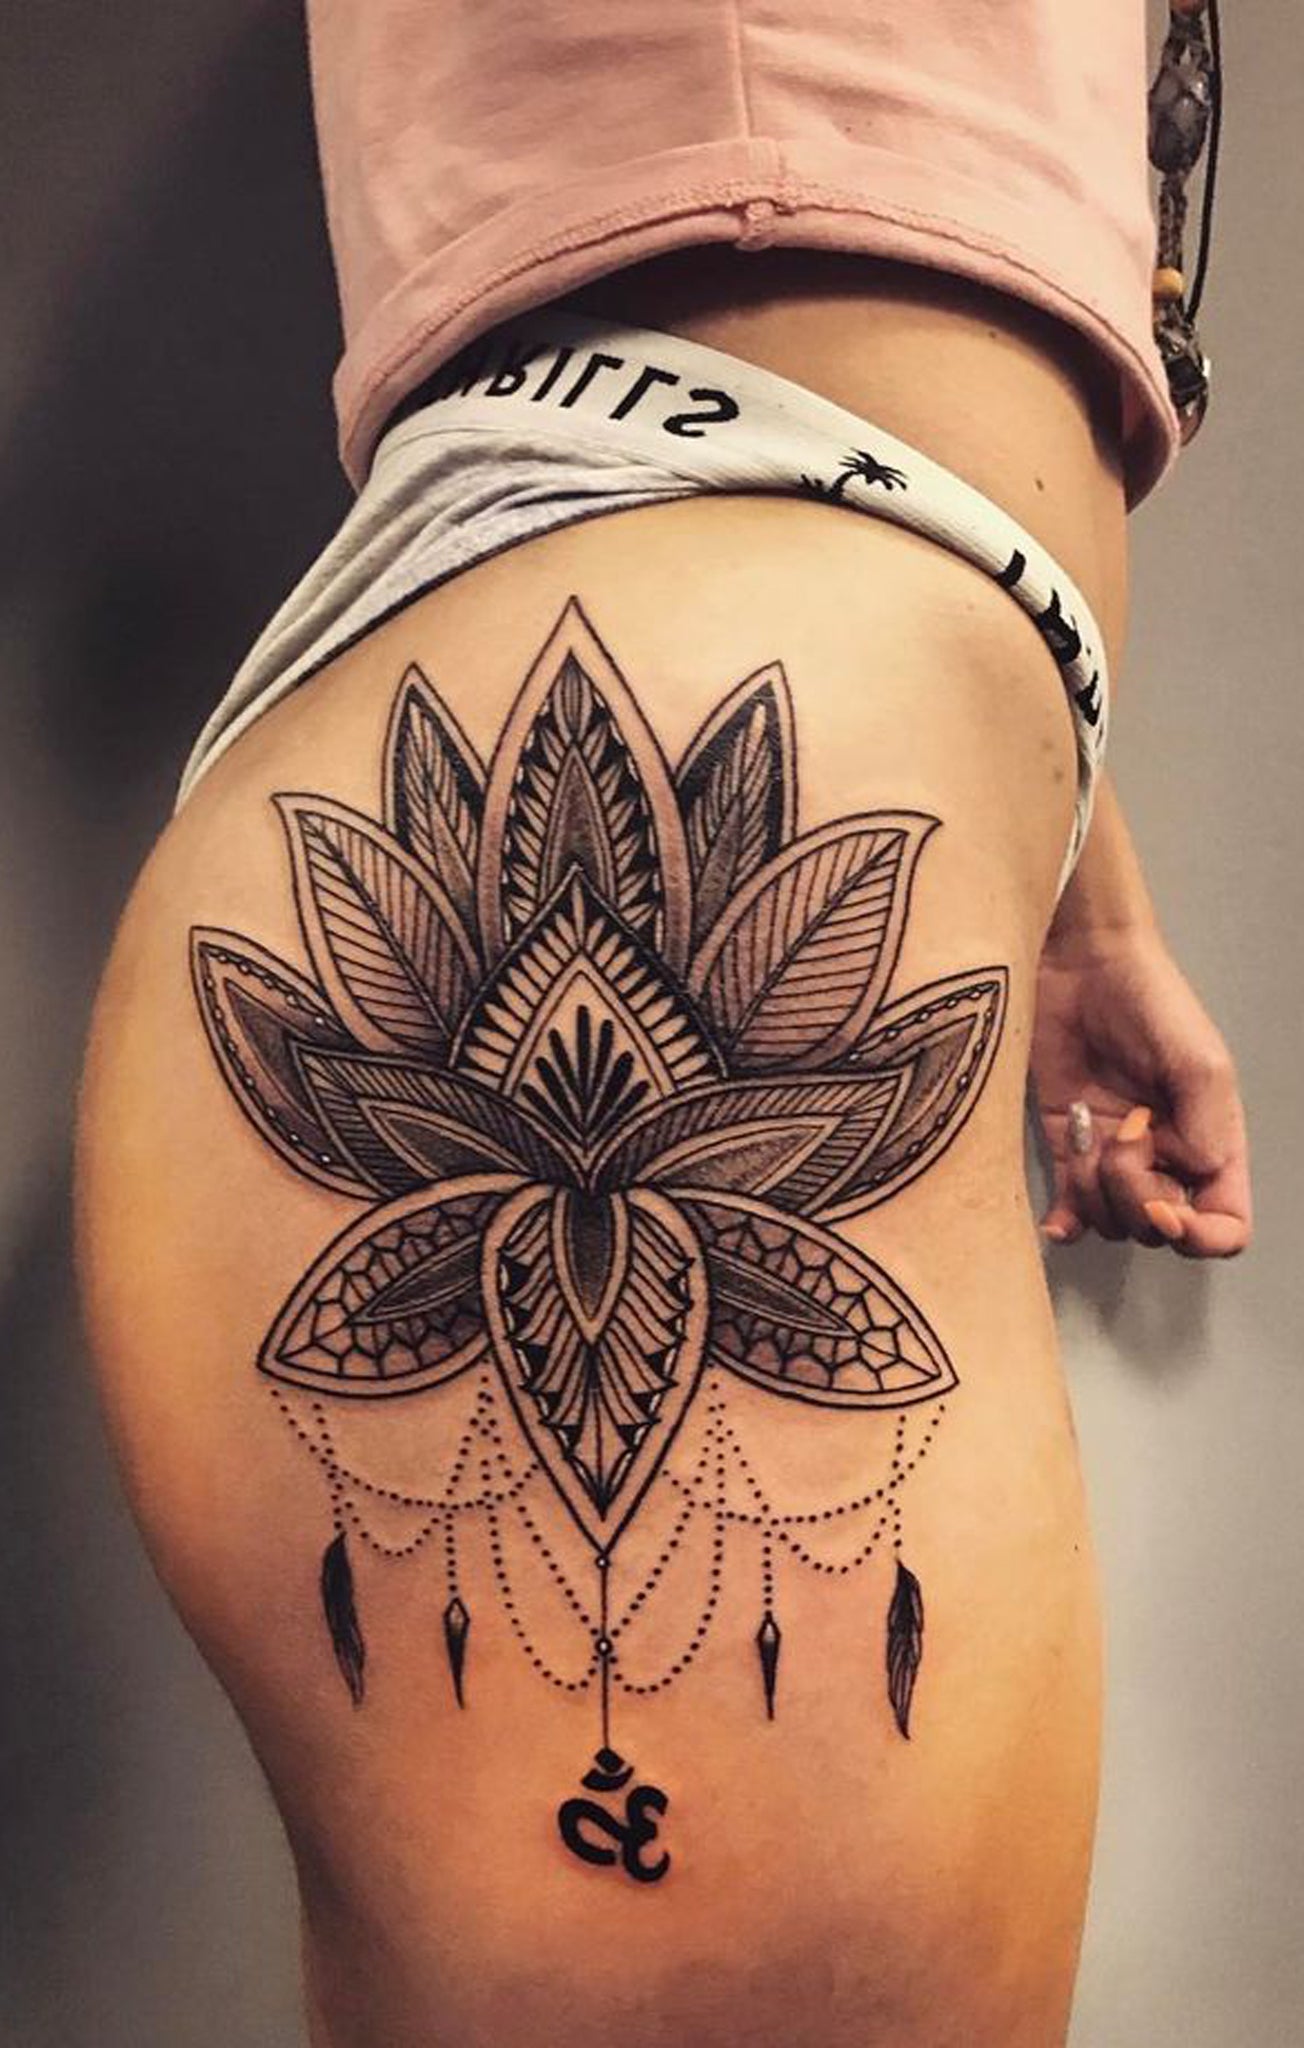 37 Leg and Thigh Tattoos for Women